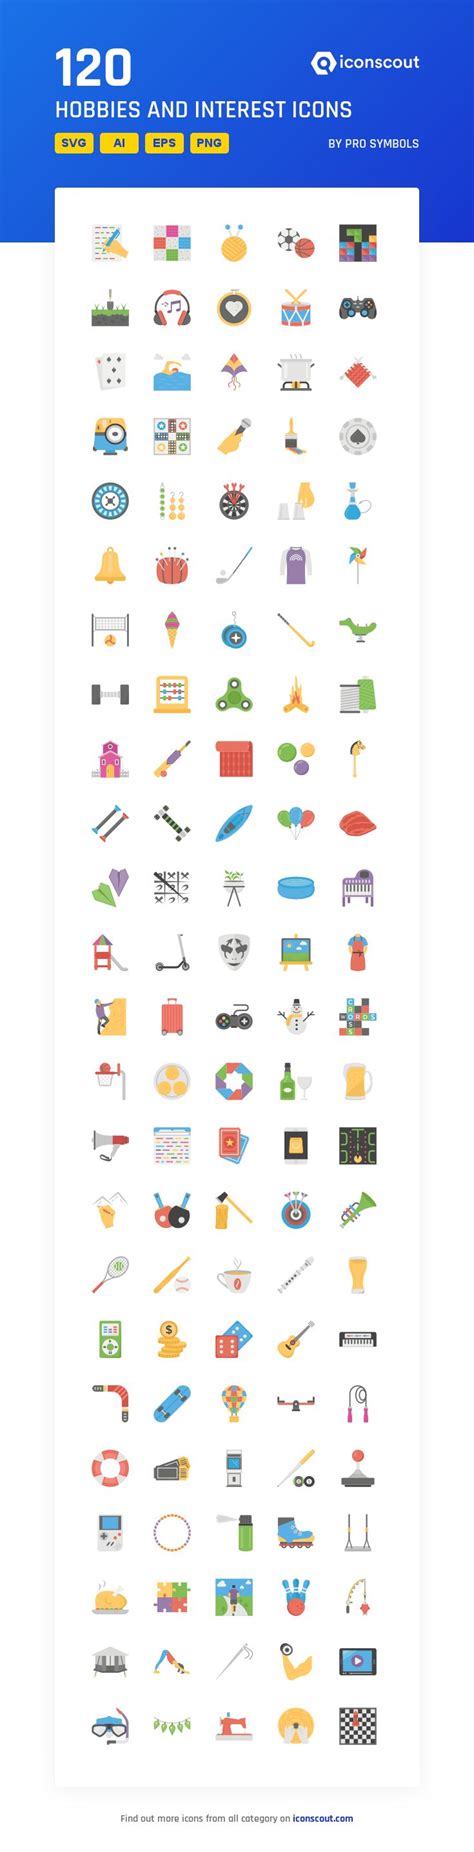 download hobbies and interest icon pack available in svg png and icon fonts hobbies and